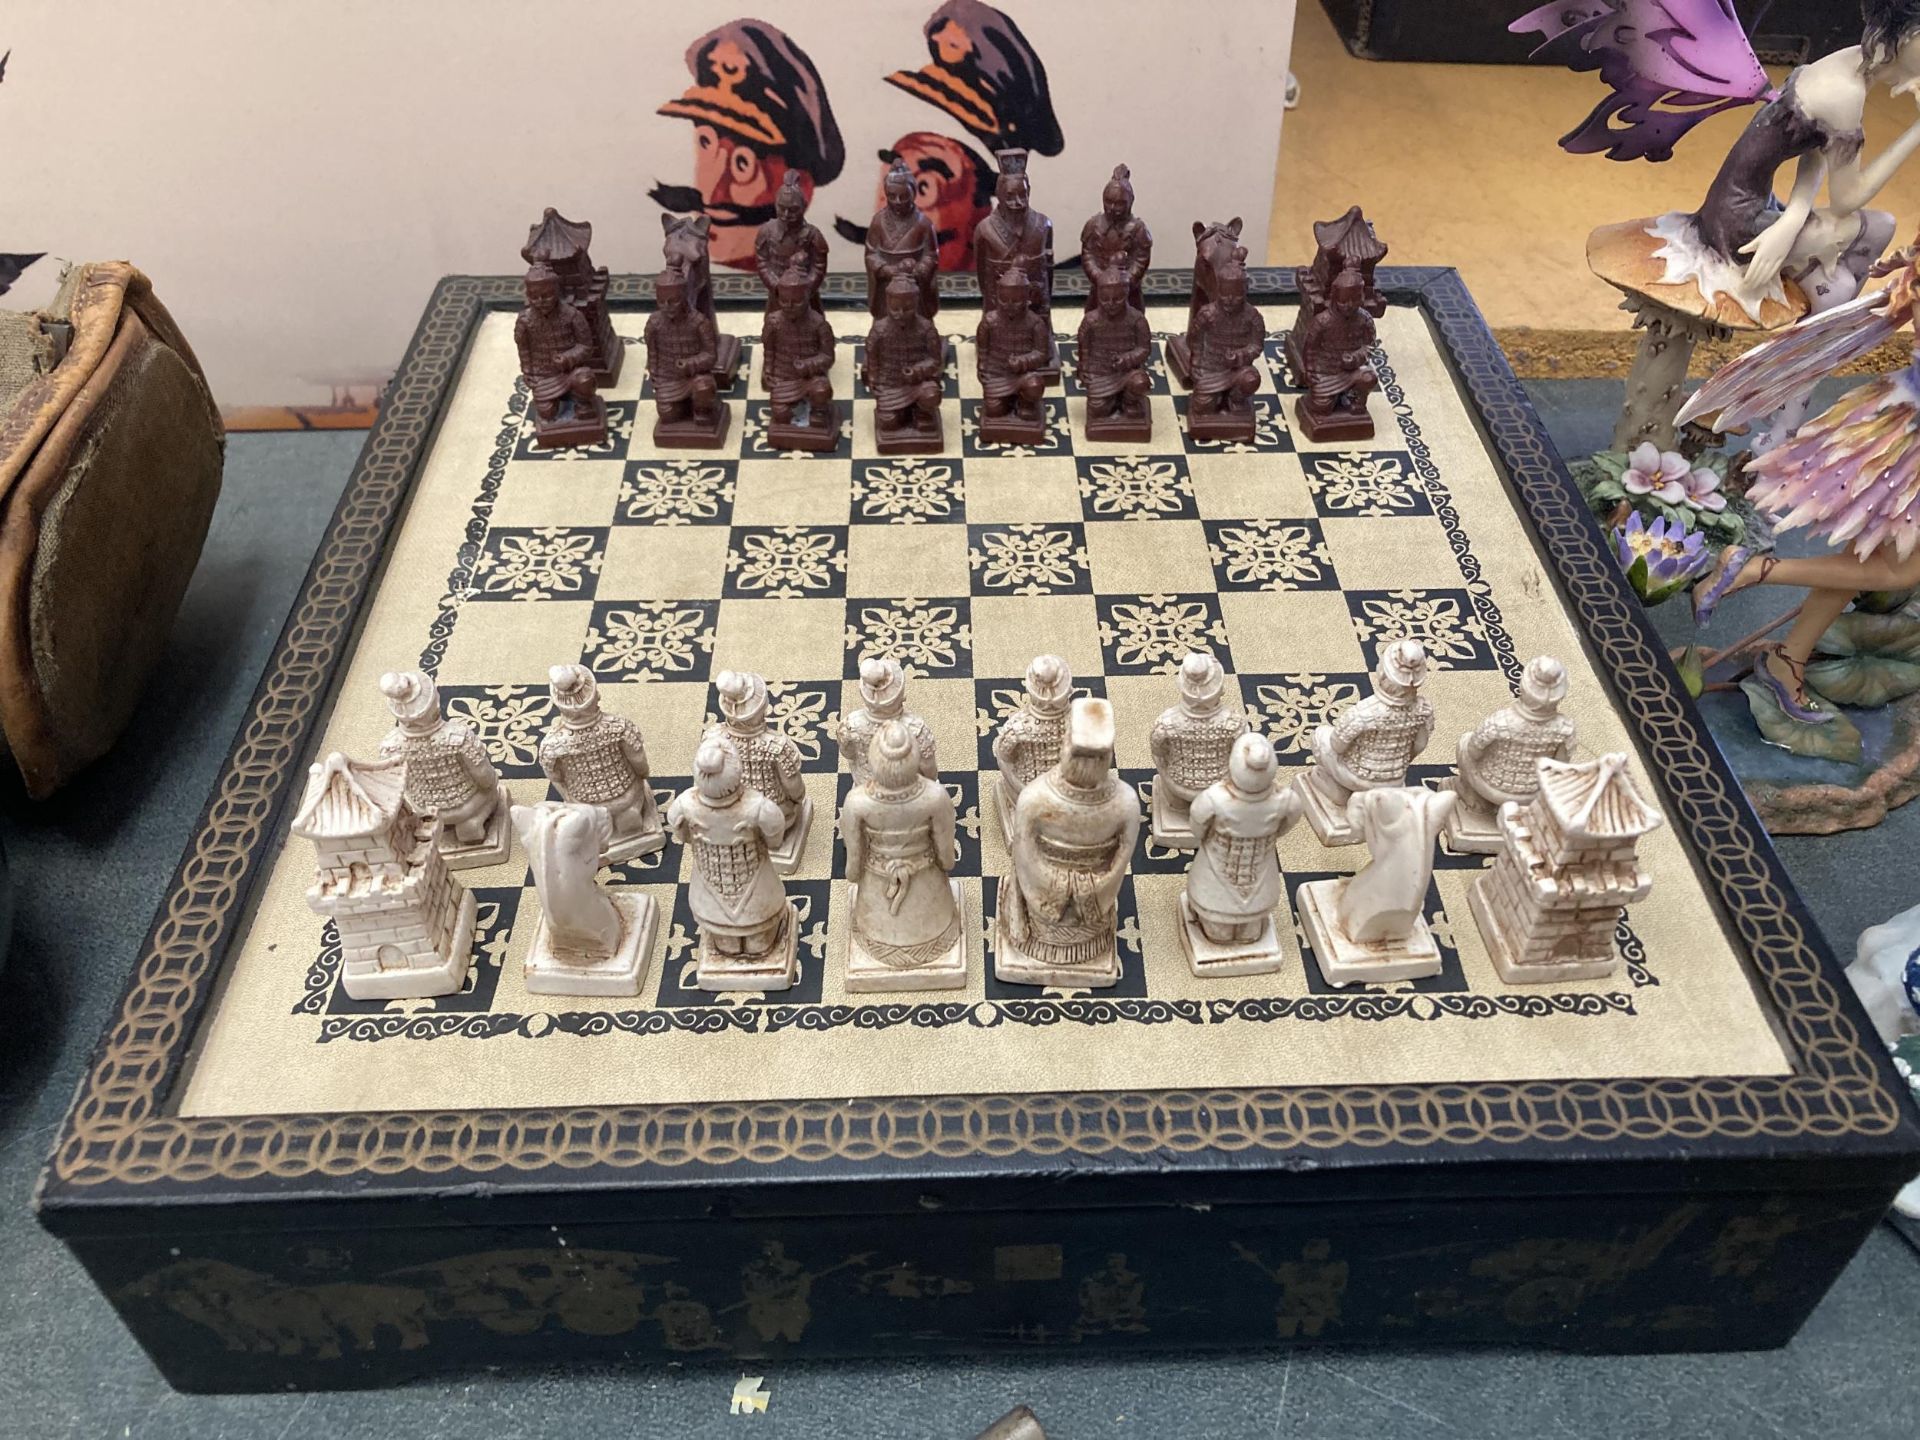 AN ORIENTAL THEMED CHESS SET AND BOARD, COMPLETE